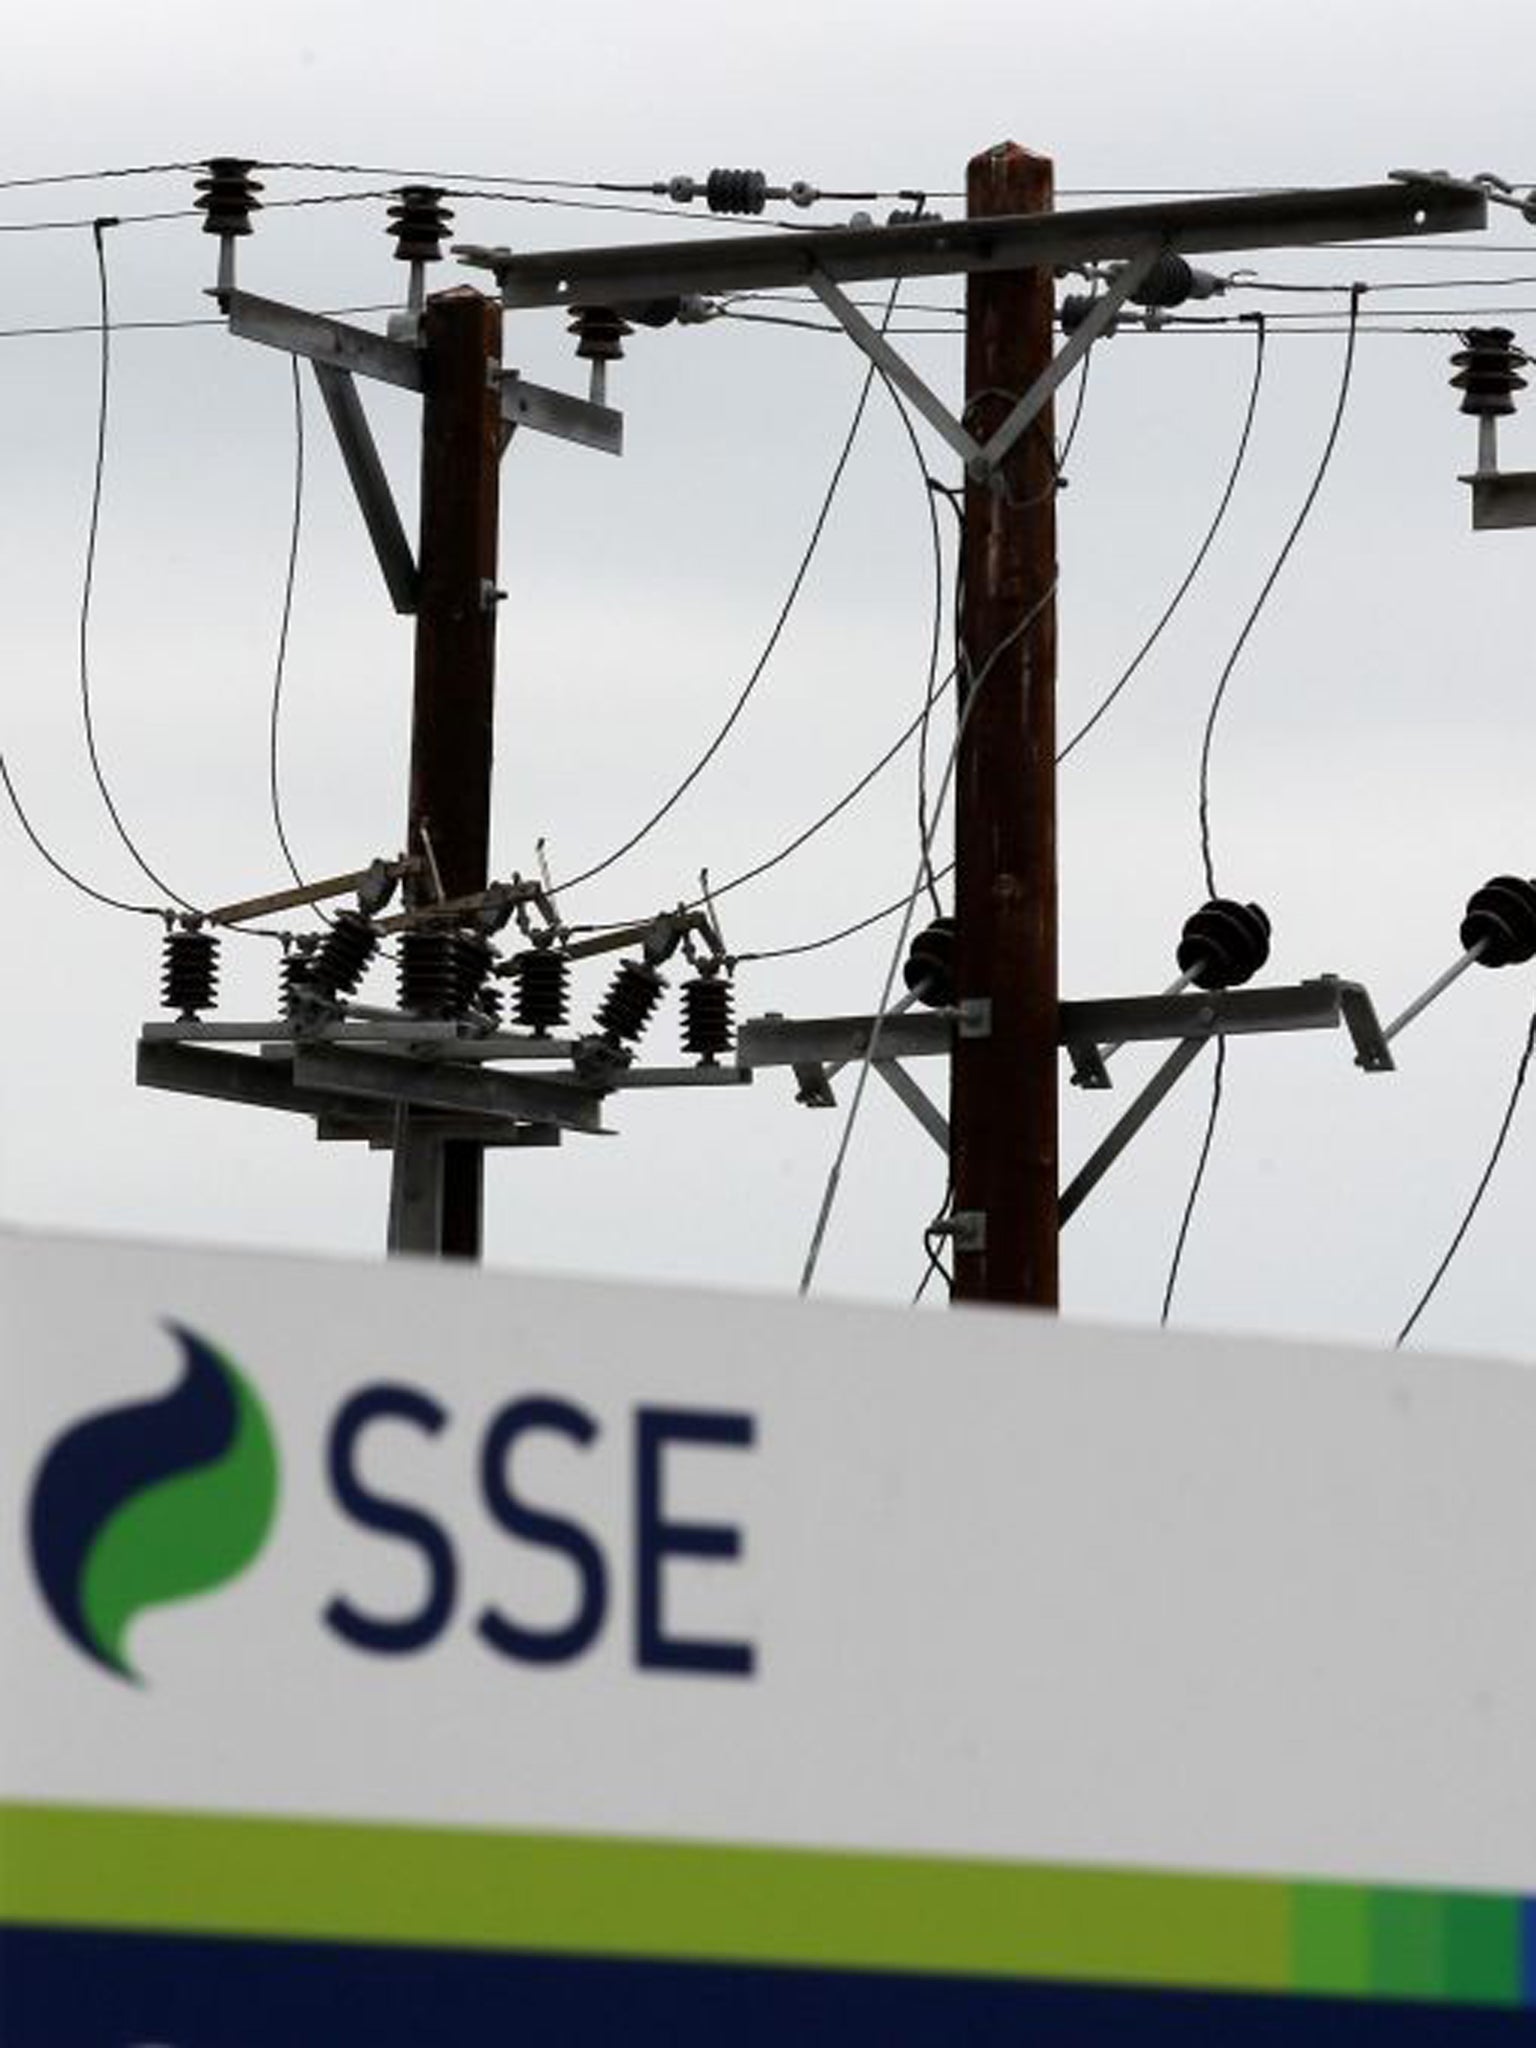 Utility giant SSE is to be fined £10.5 million for 'prolonged and extensive' mis-selling